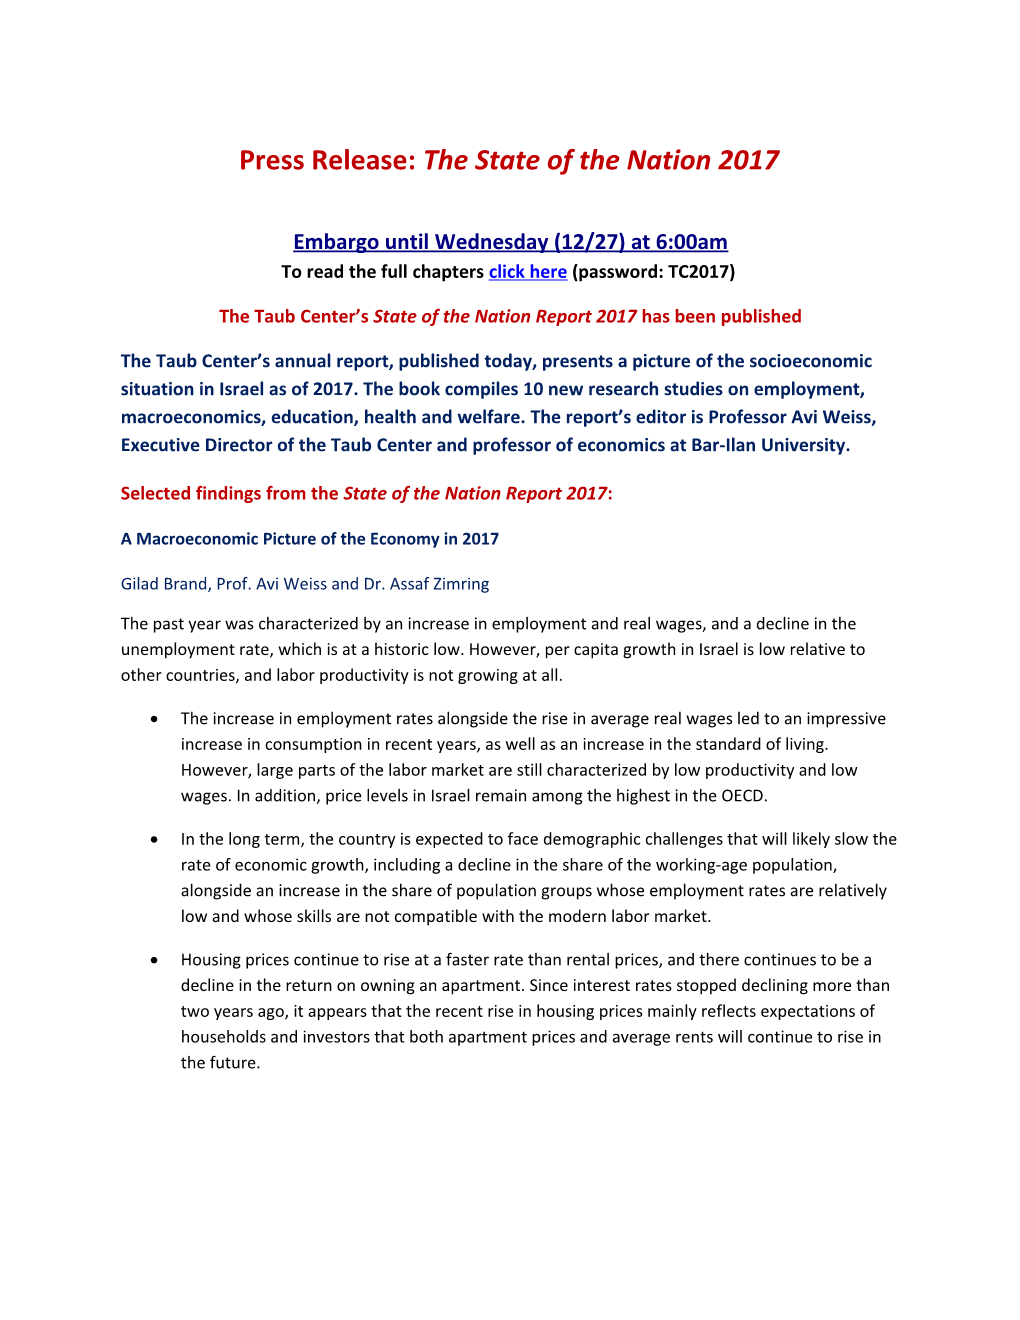 Press Release: the State of the Nation 2017